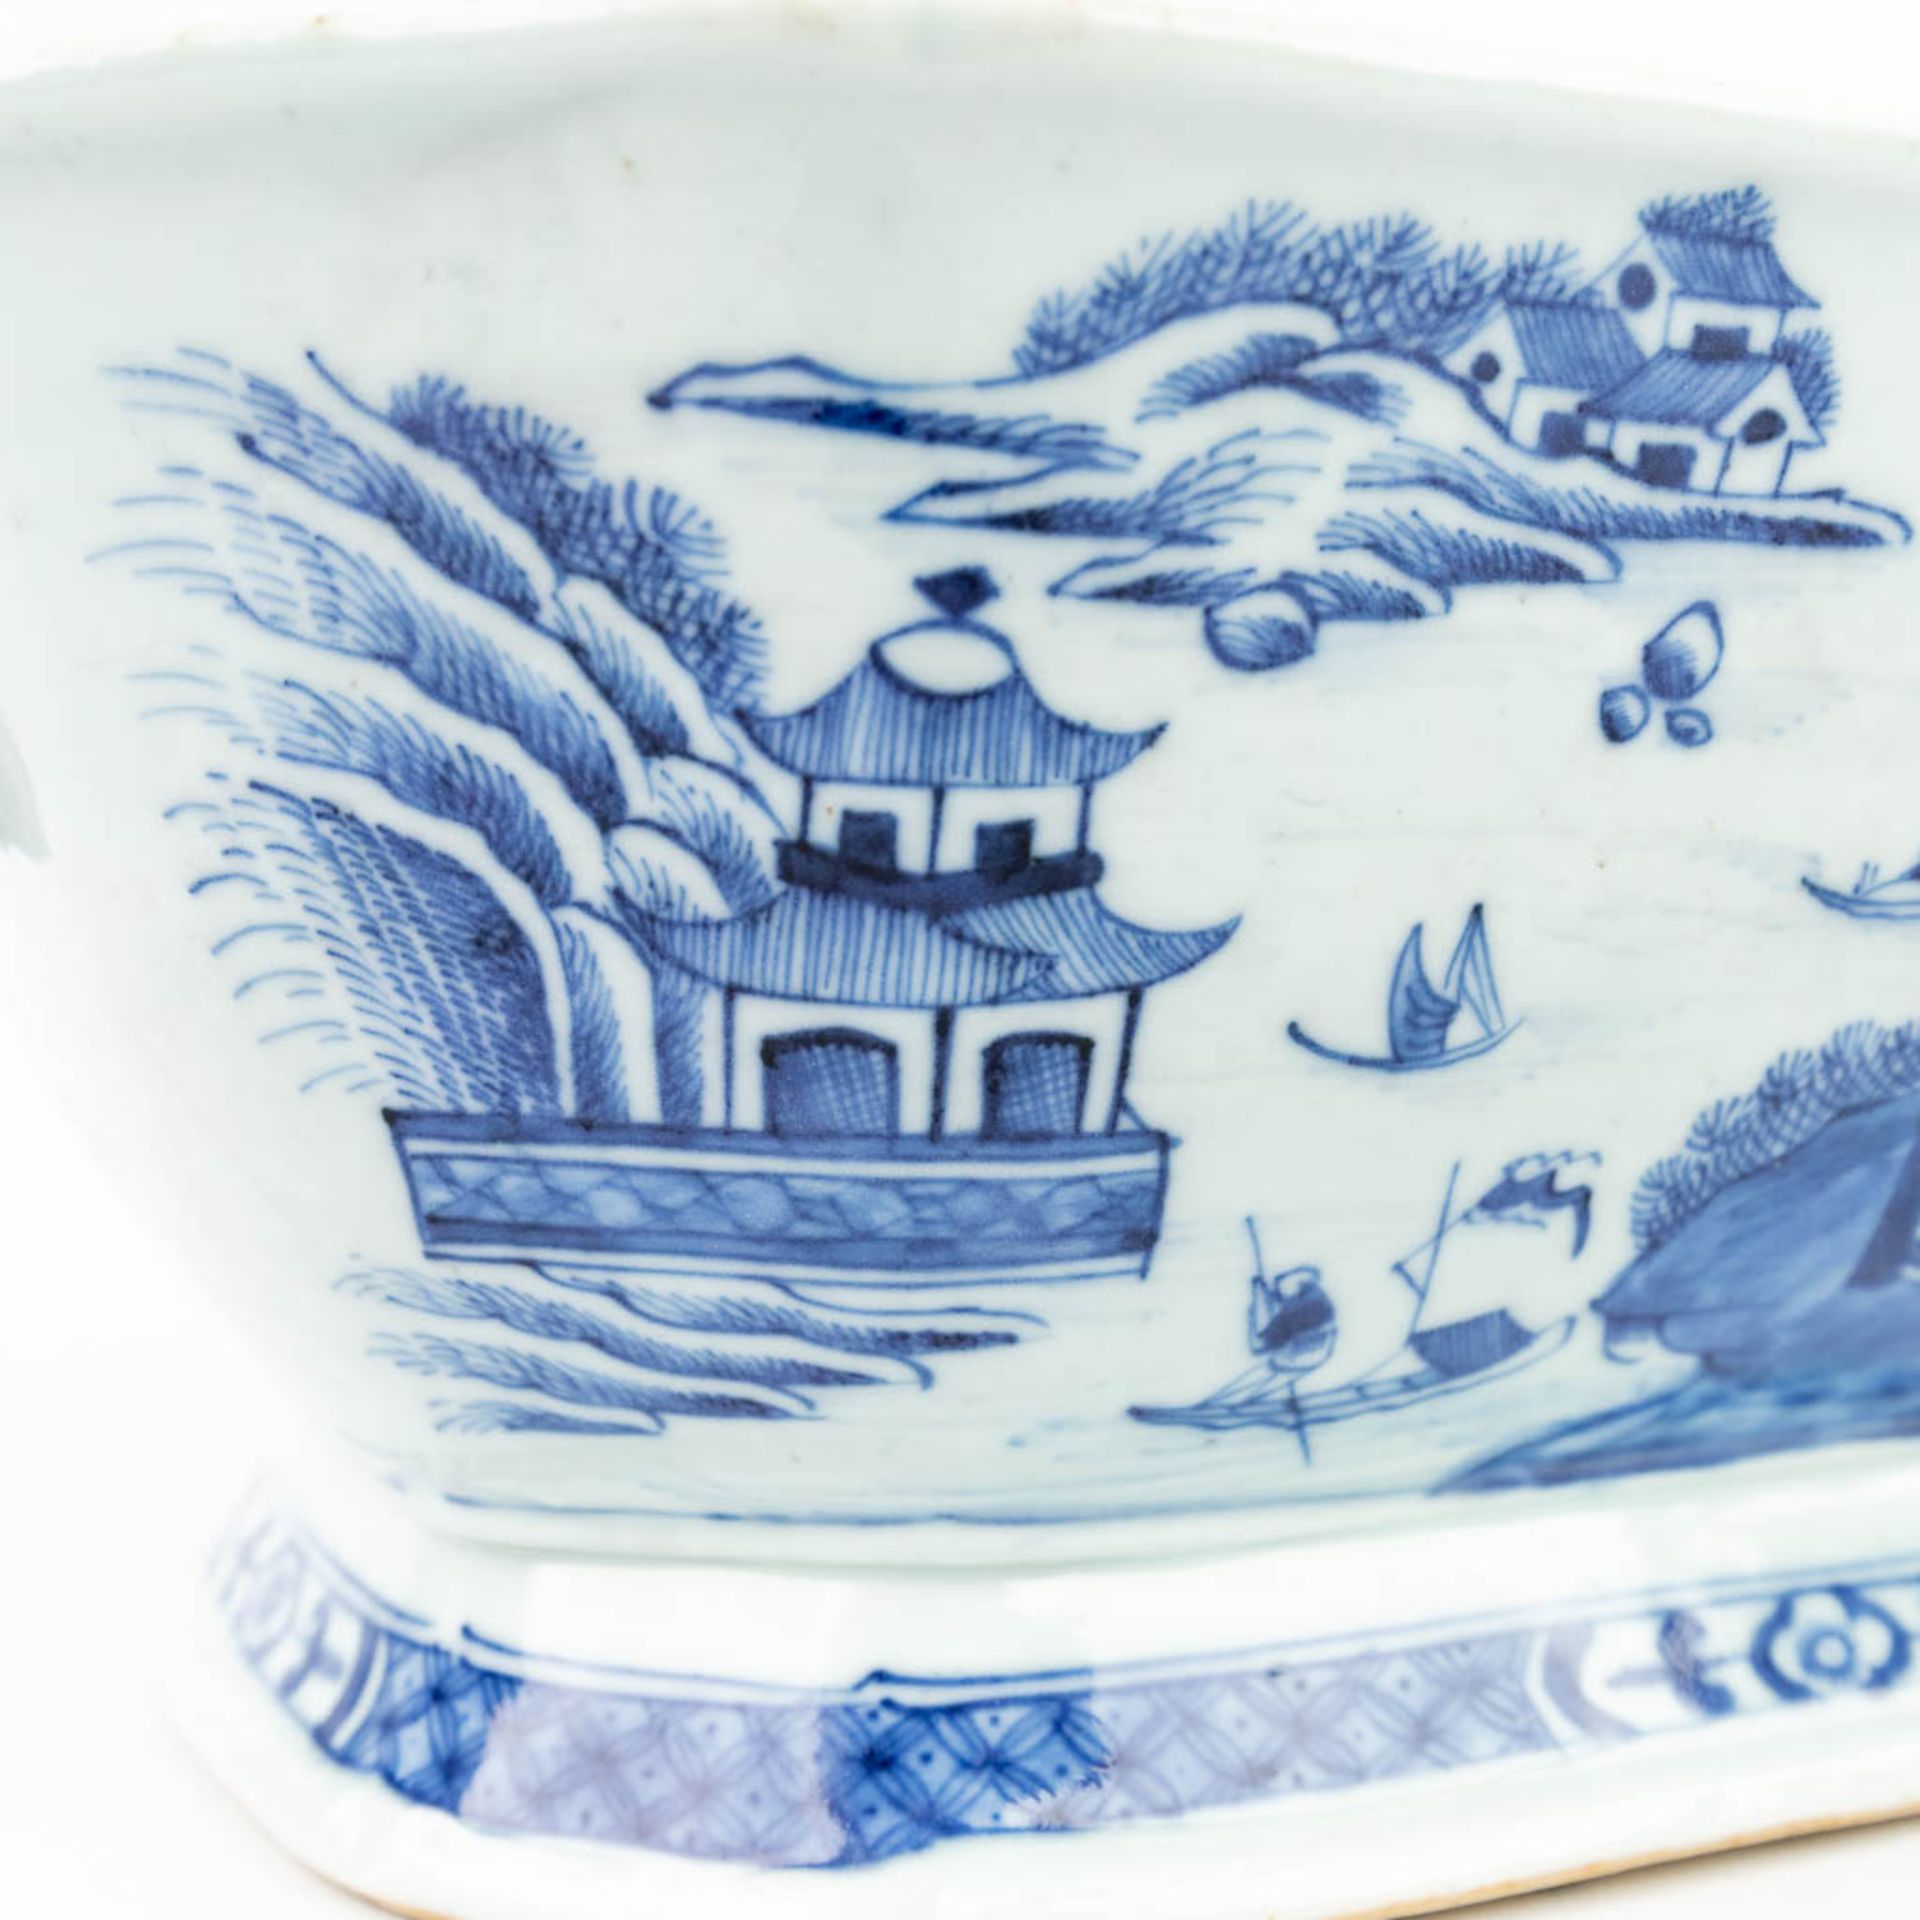 A Chinese soup tureen made of blue-white porcelain. (22 x 31 x 22 cm) - Image 13 of 15